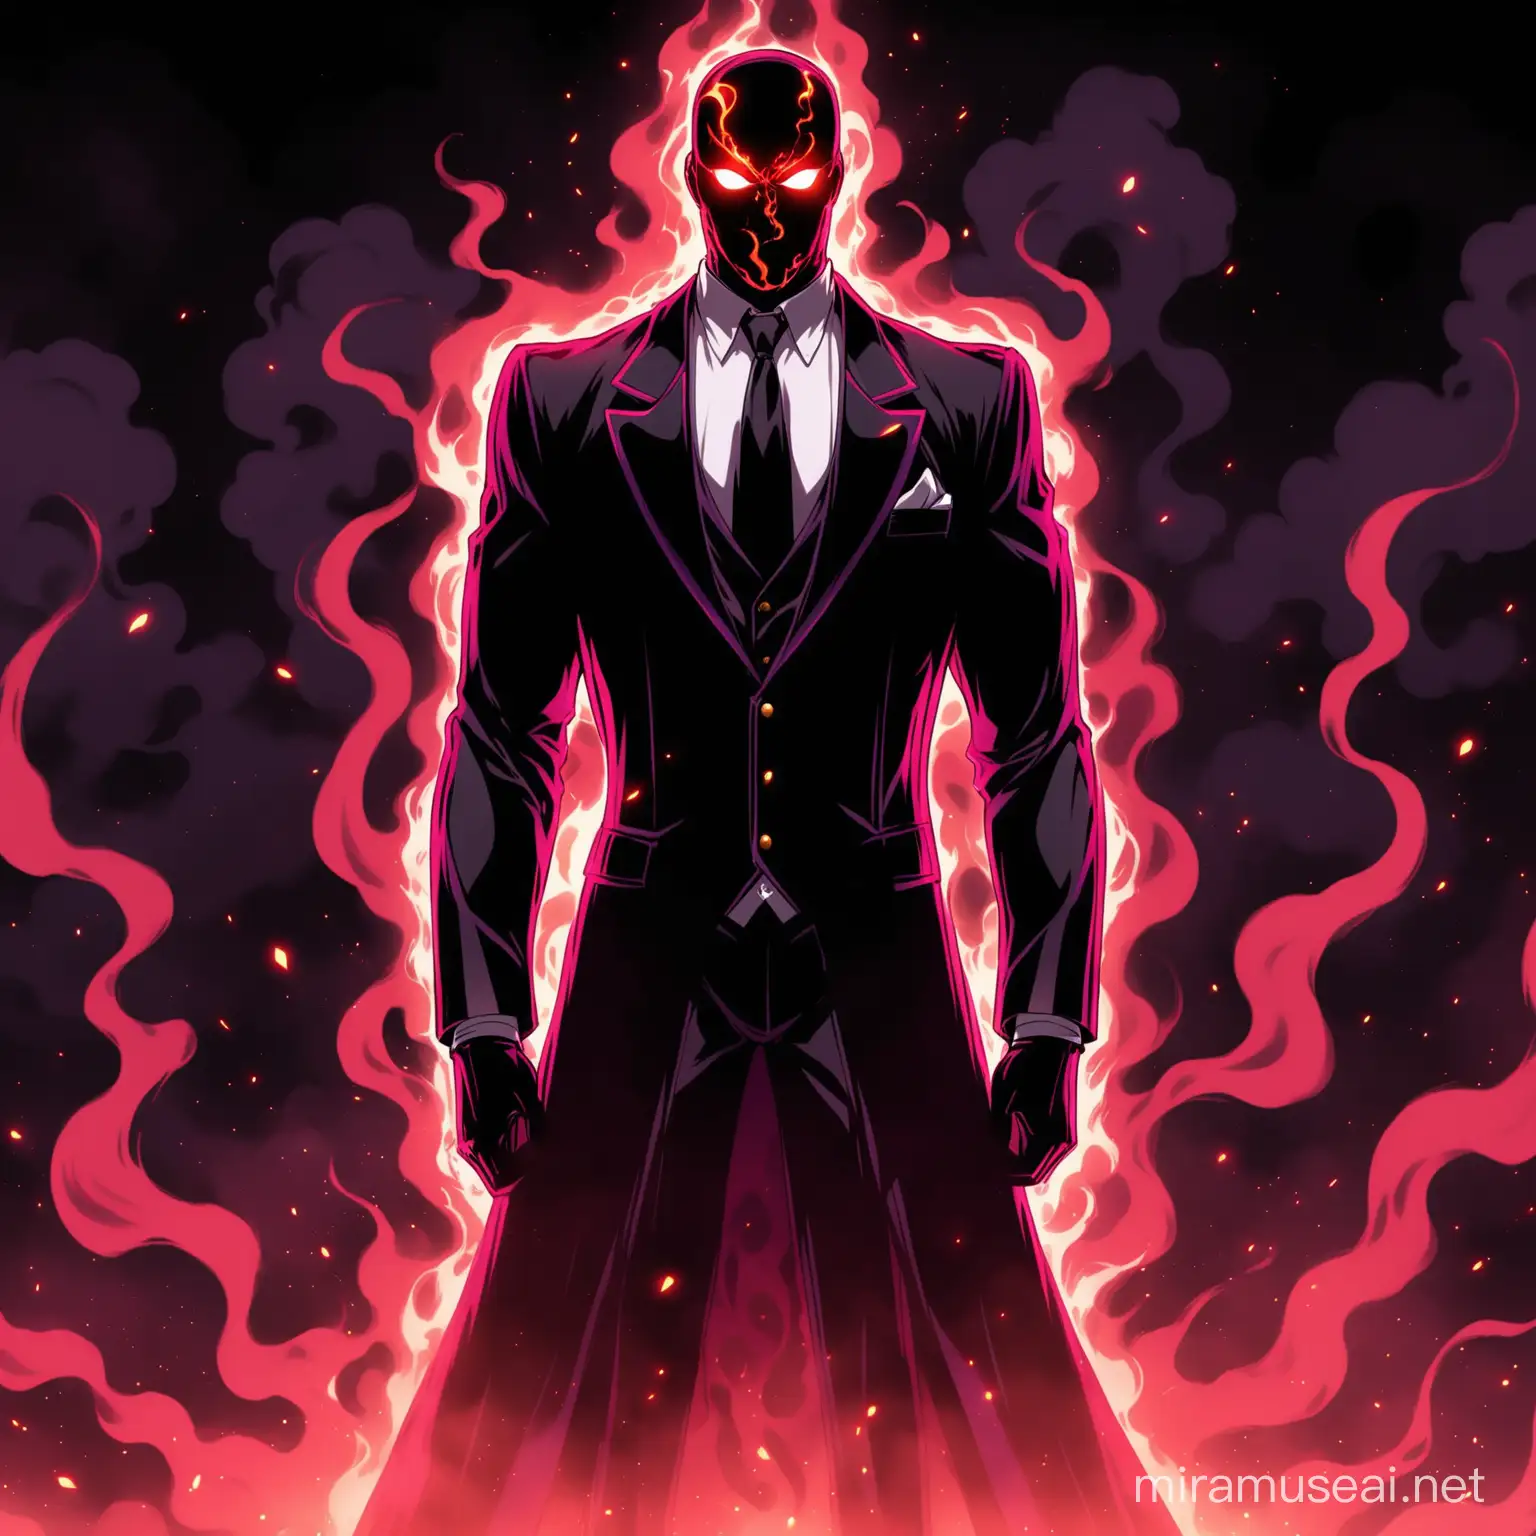 jojo's bizarre adventures style. a stand made of black smoke in the shape of a phantom wearing a suit and tie. glowing, red eyes